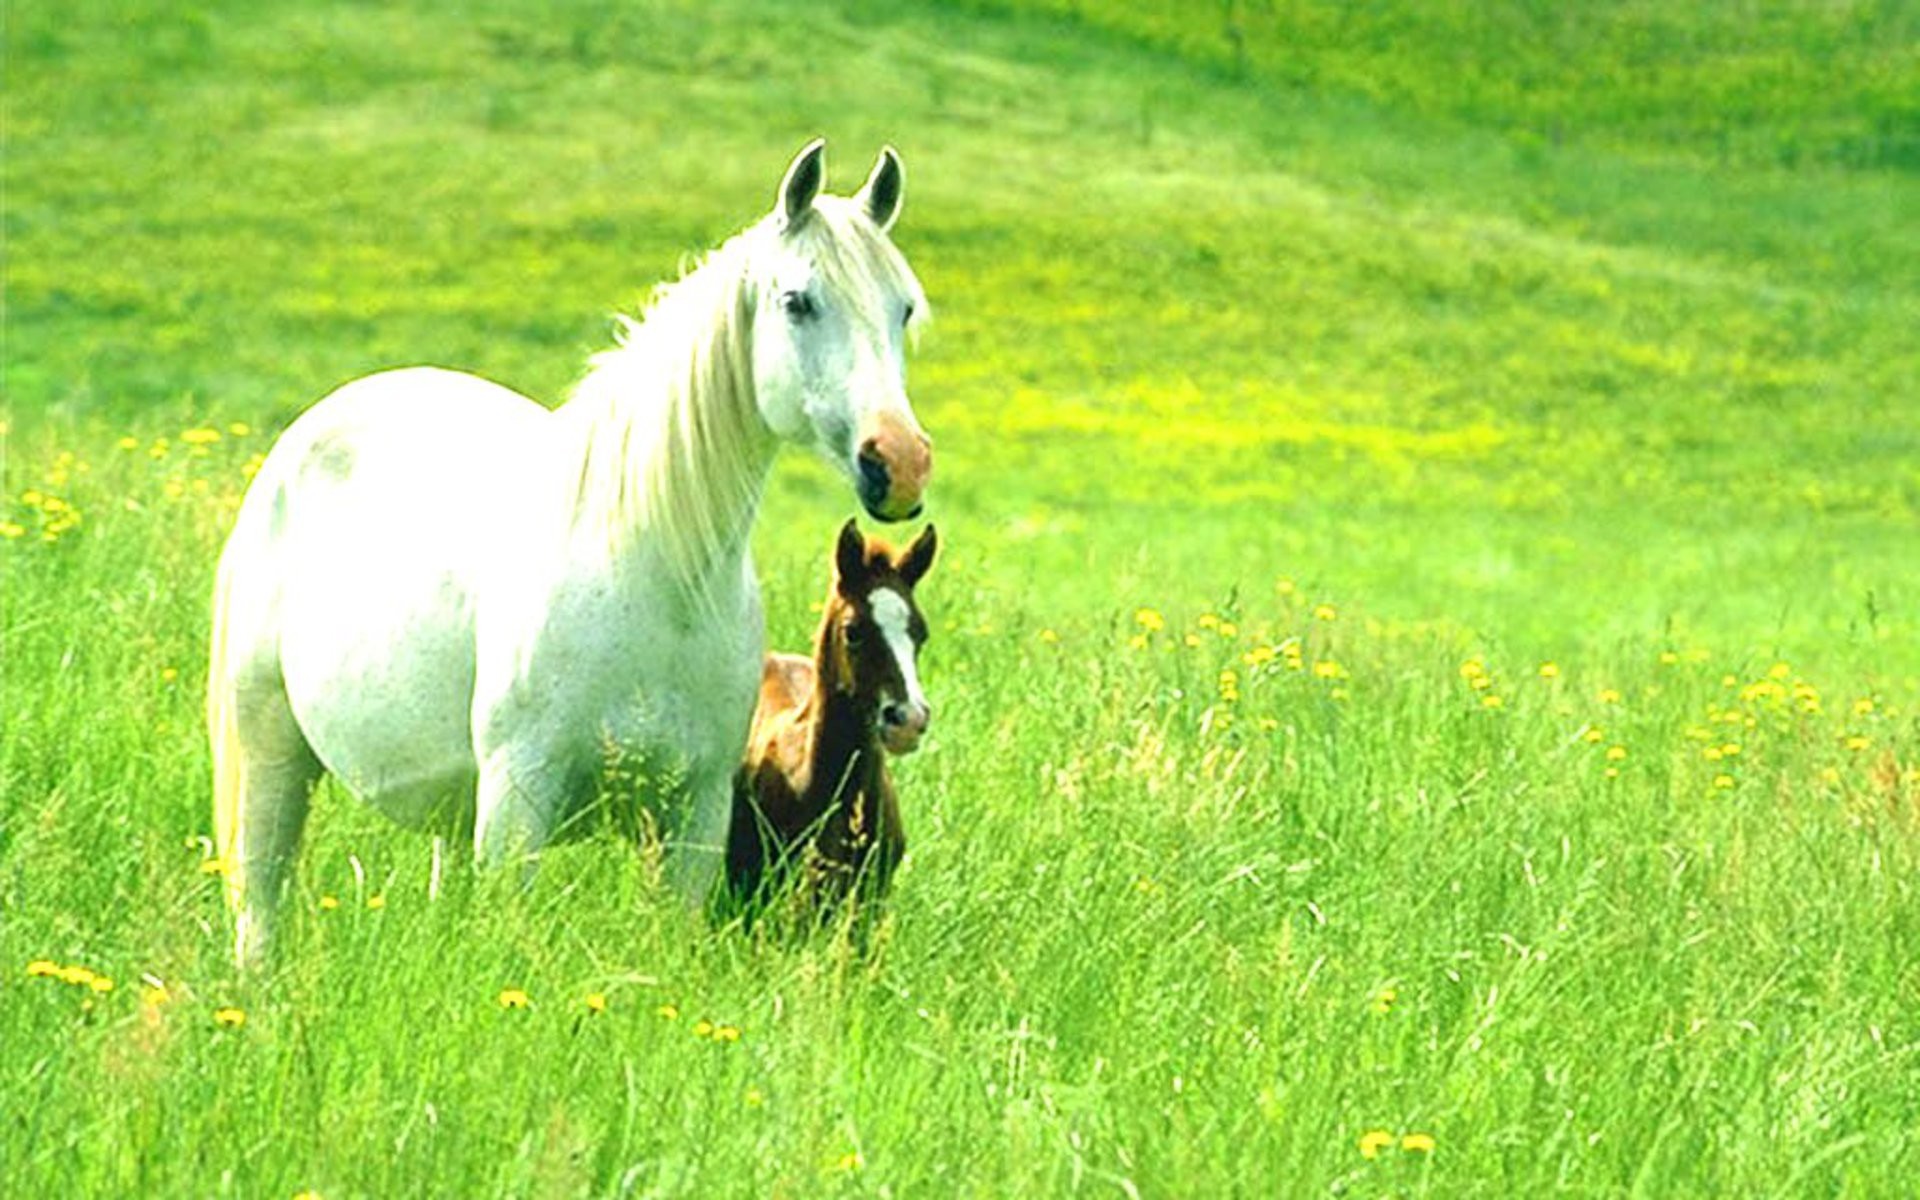 Horse Wallpaper Awesome Cool - fullwidehd.com